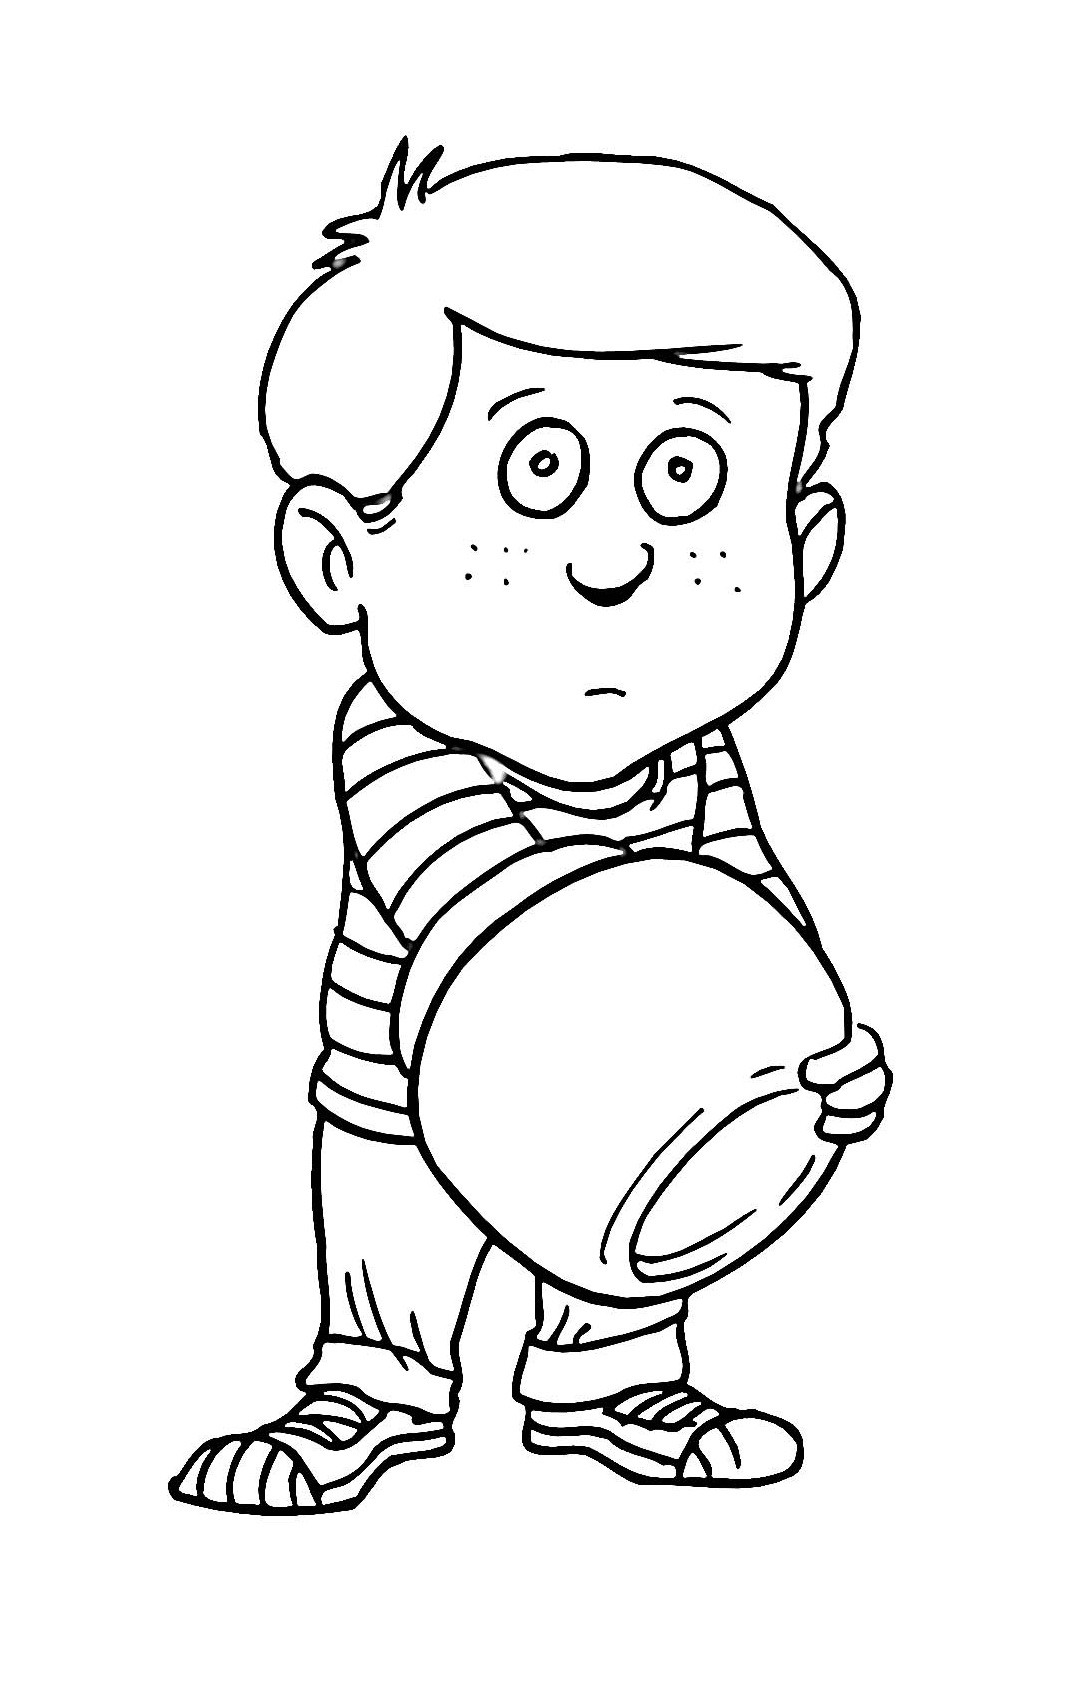 Coloring Pages For Boys And Girls
 Free Printable Boy Coloring Pages For Kids